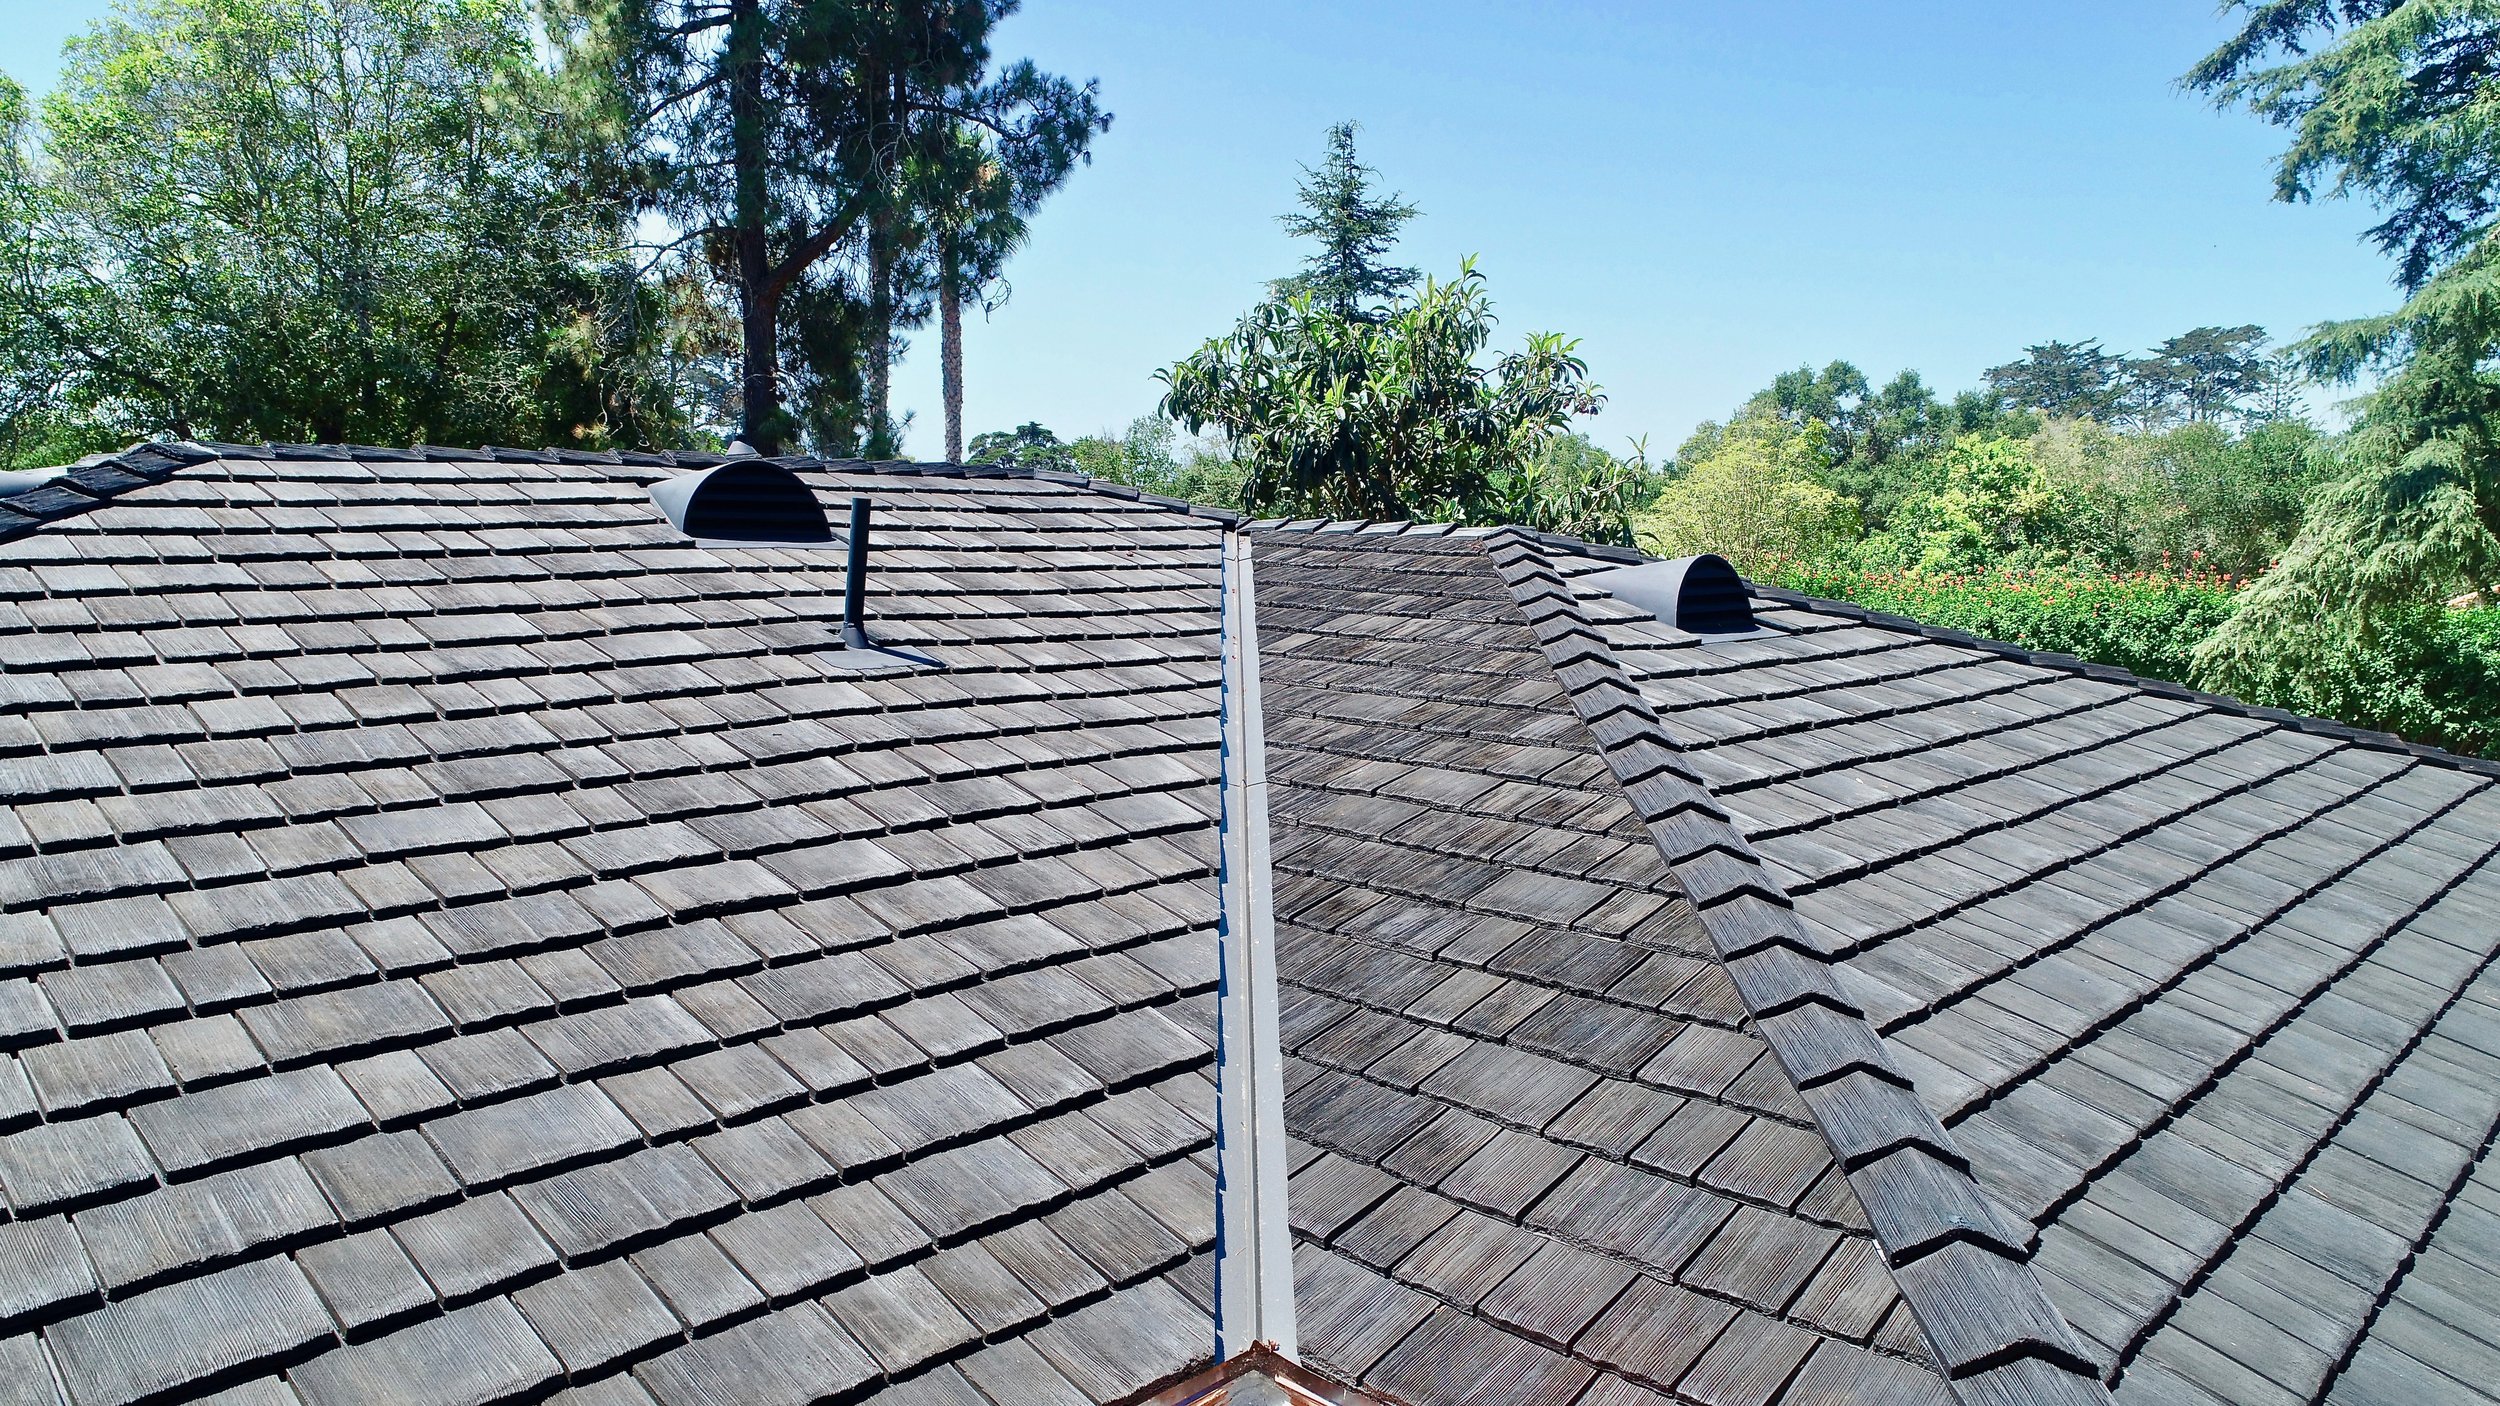 6 Problems With Concrete Roof Tiles And, Best Underlayment For Tile Roof